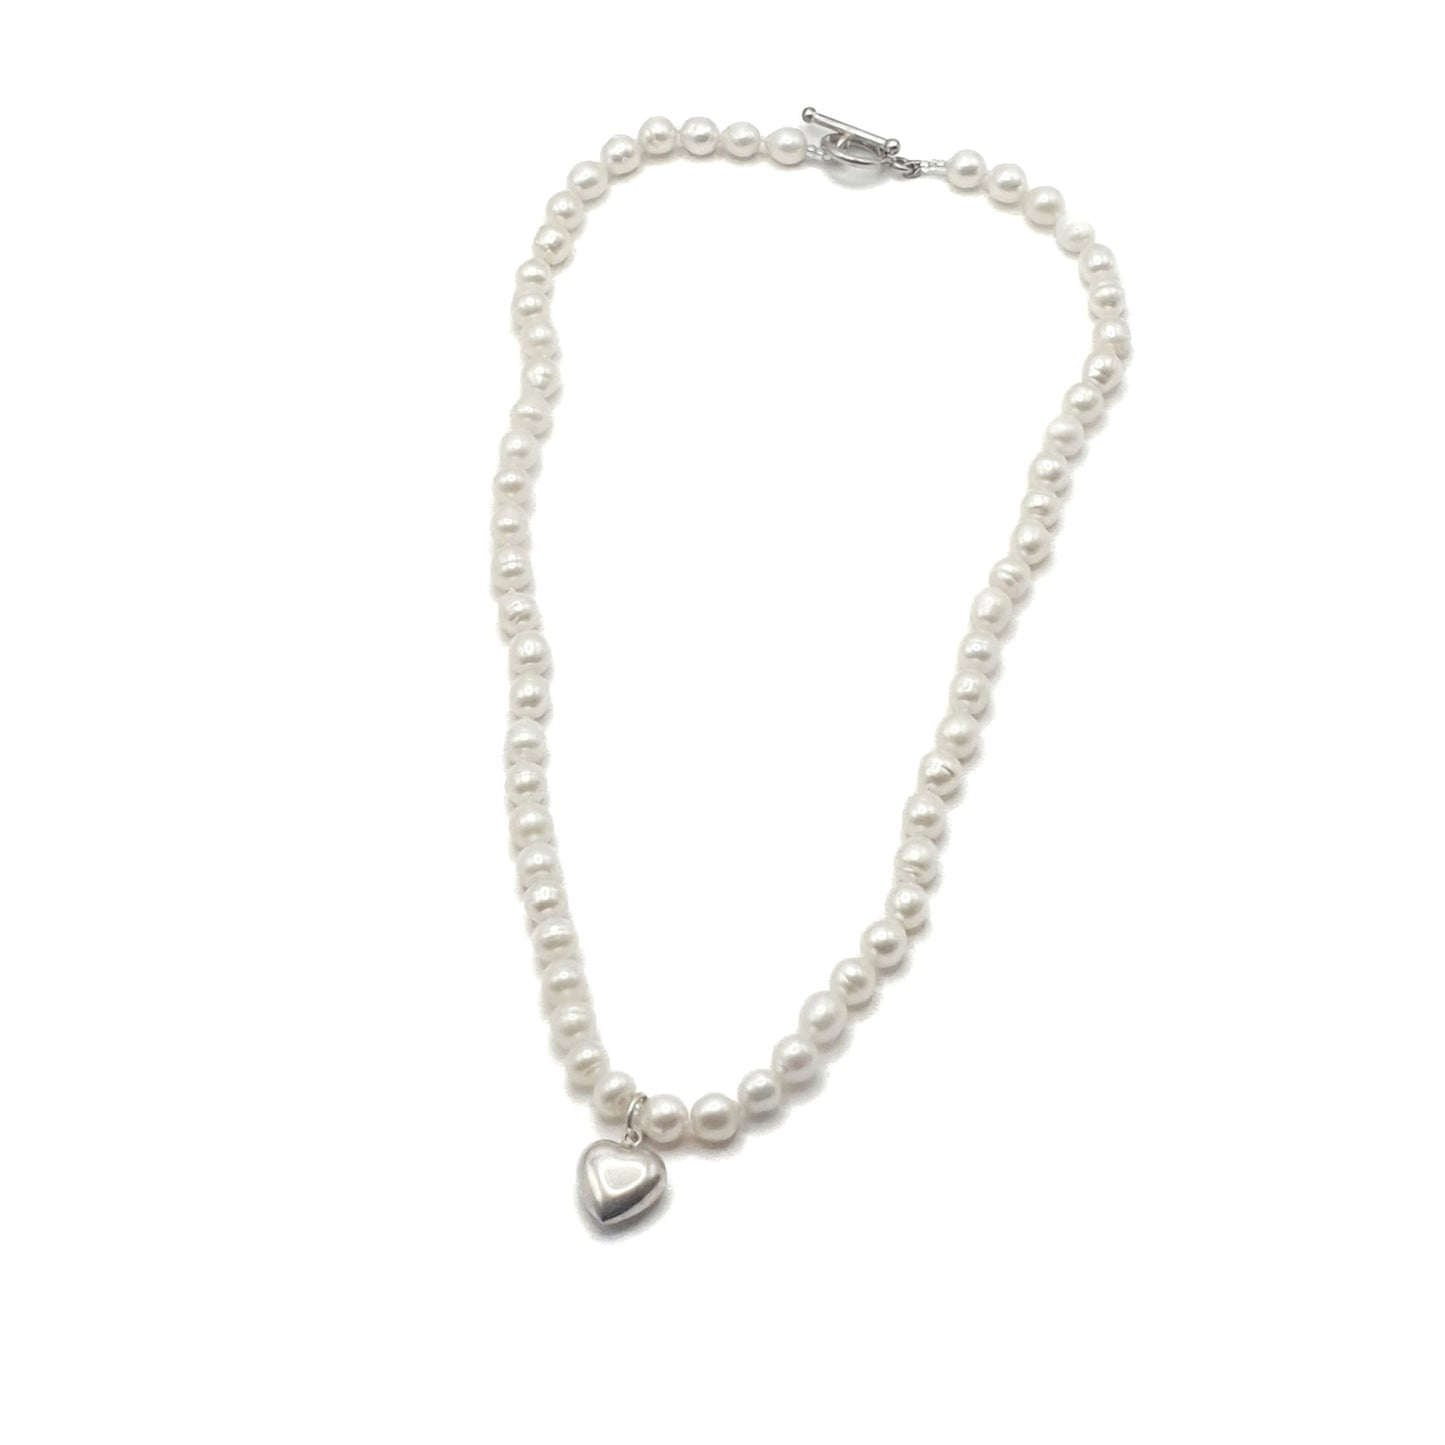 Delicate freshwater pearl necklace in white with a sterling silver puff heart